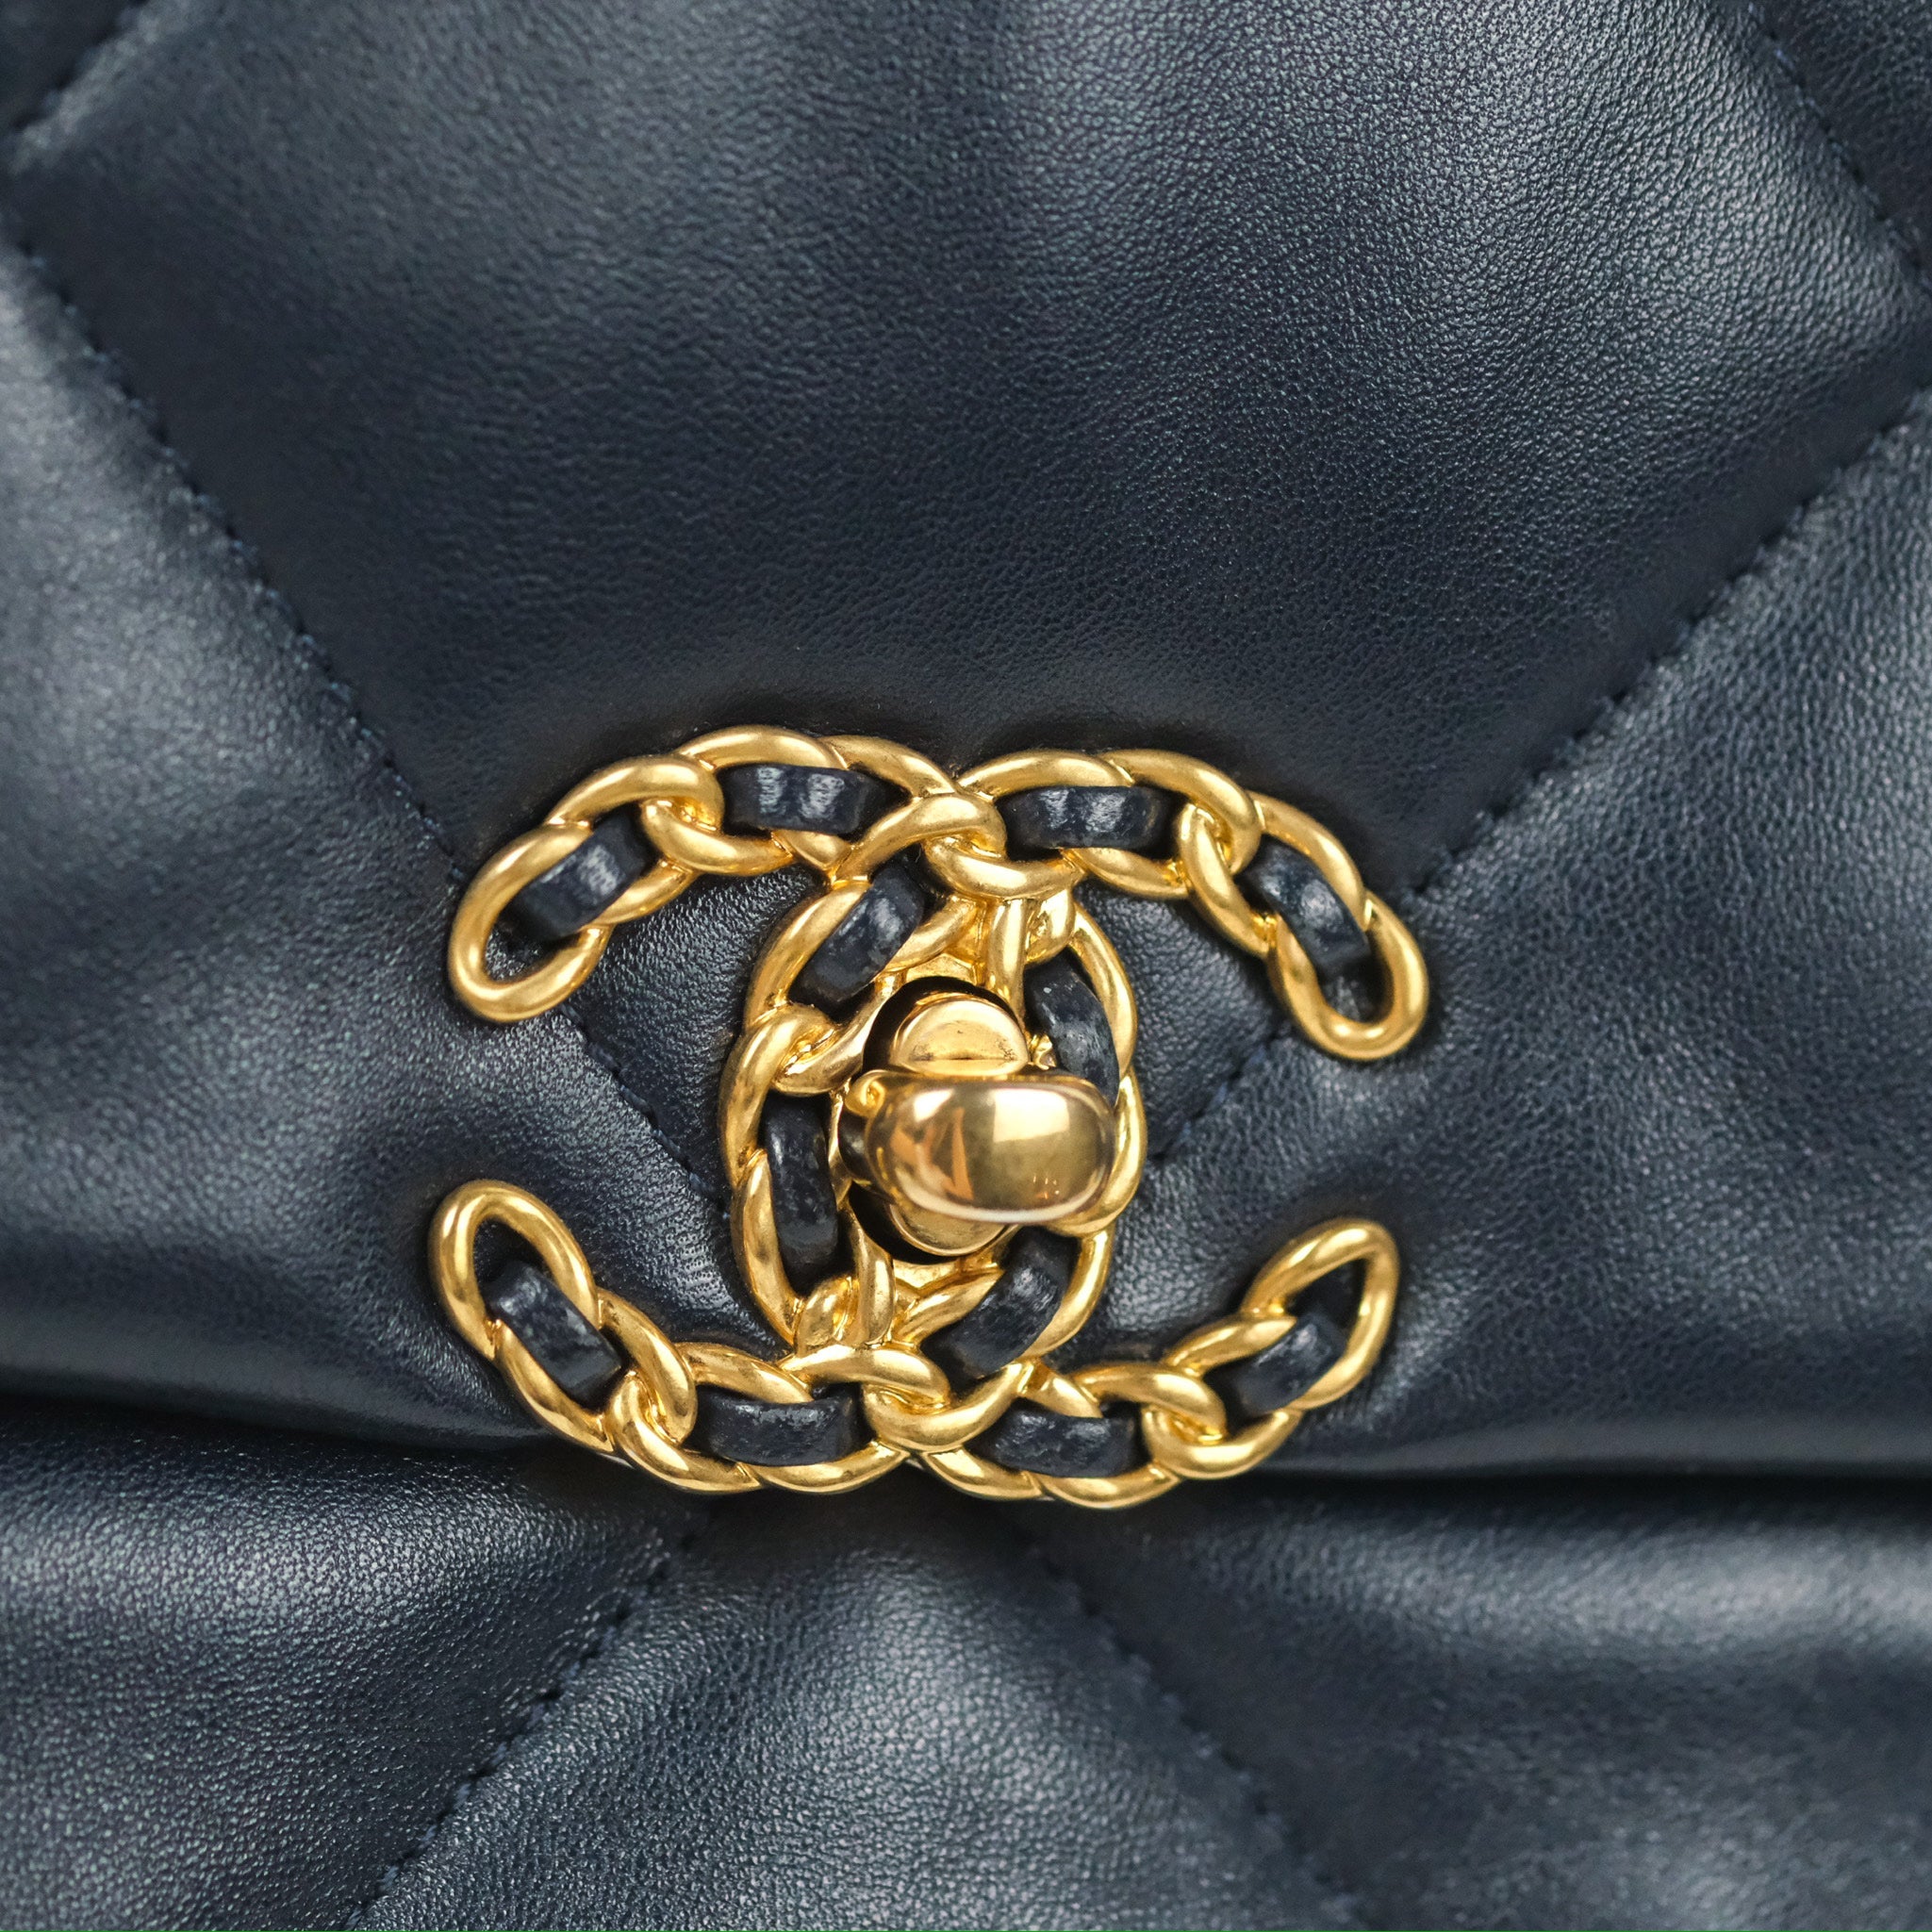 chanel flap 19 bag small